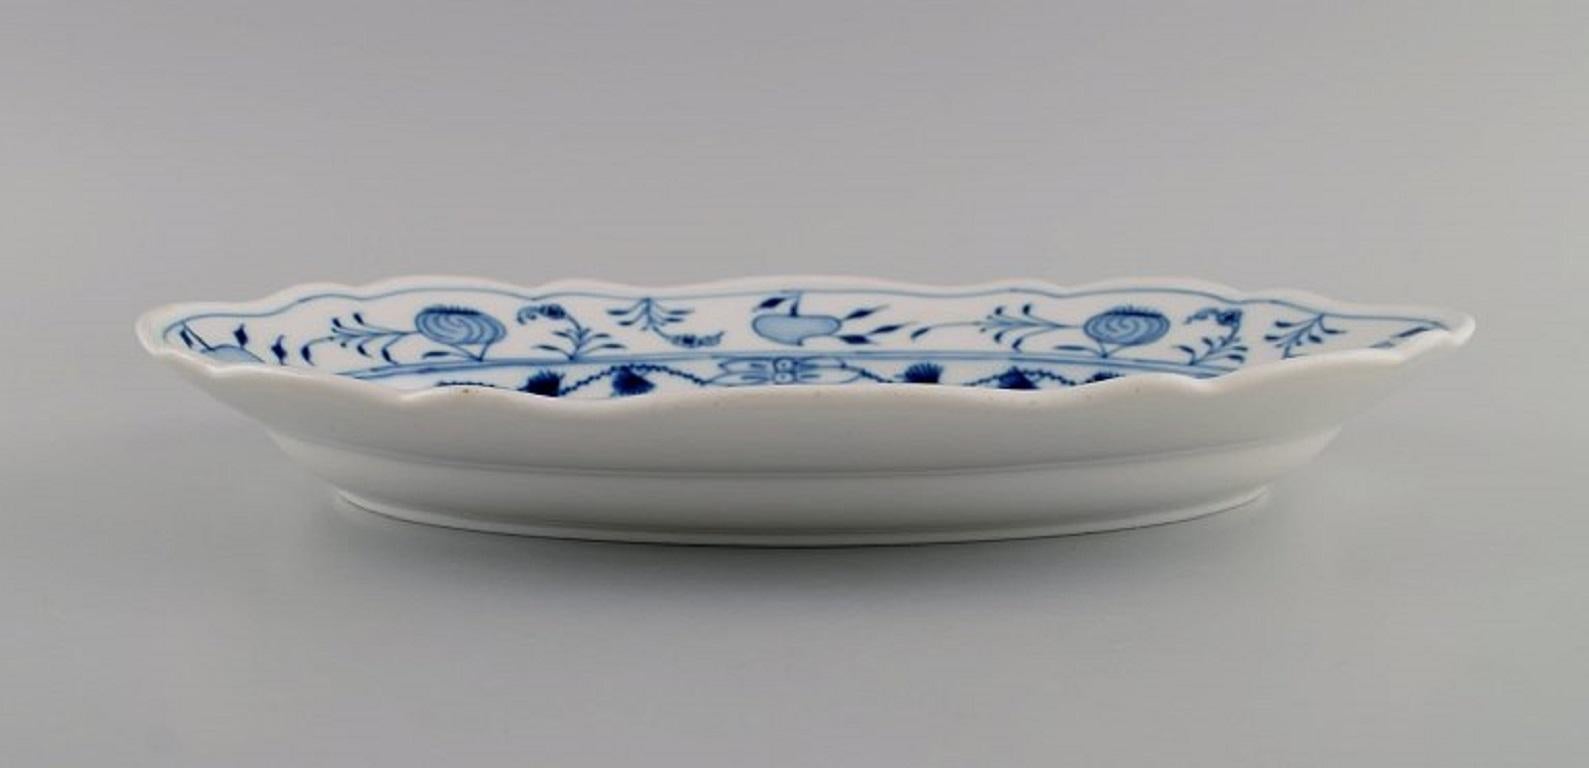 19th Century Antique Meissen Blue Onion Serving Dish in Hand-Painted Porcelain, Late 19th C